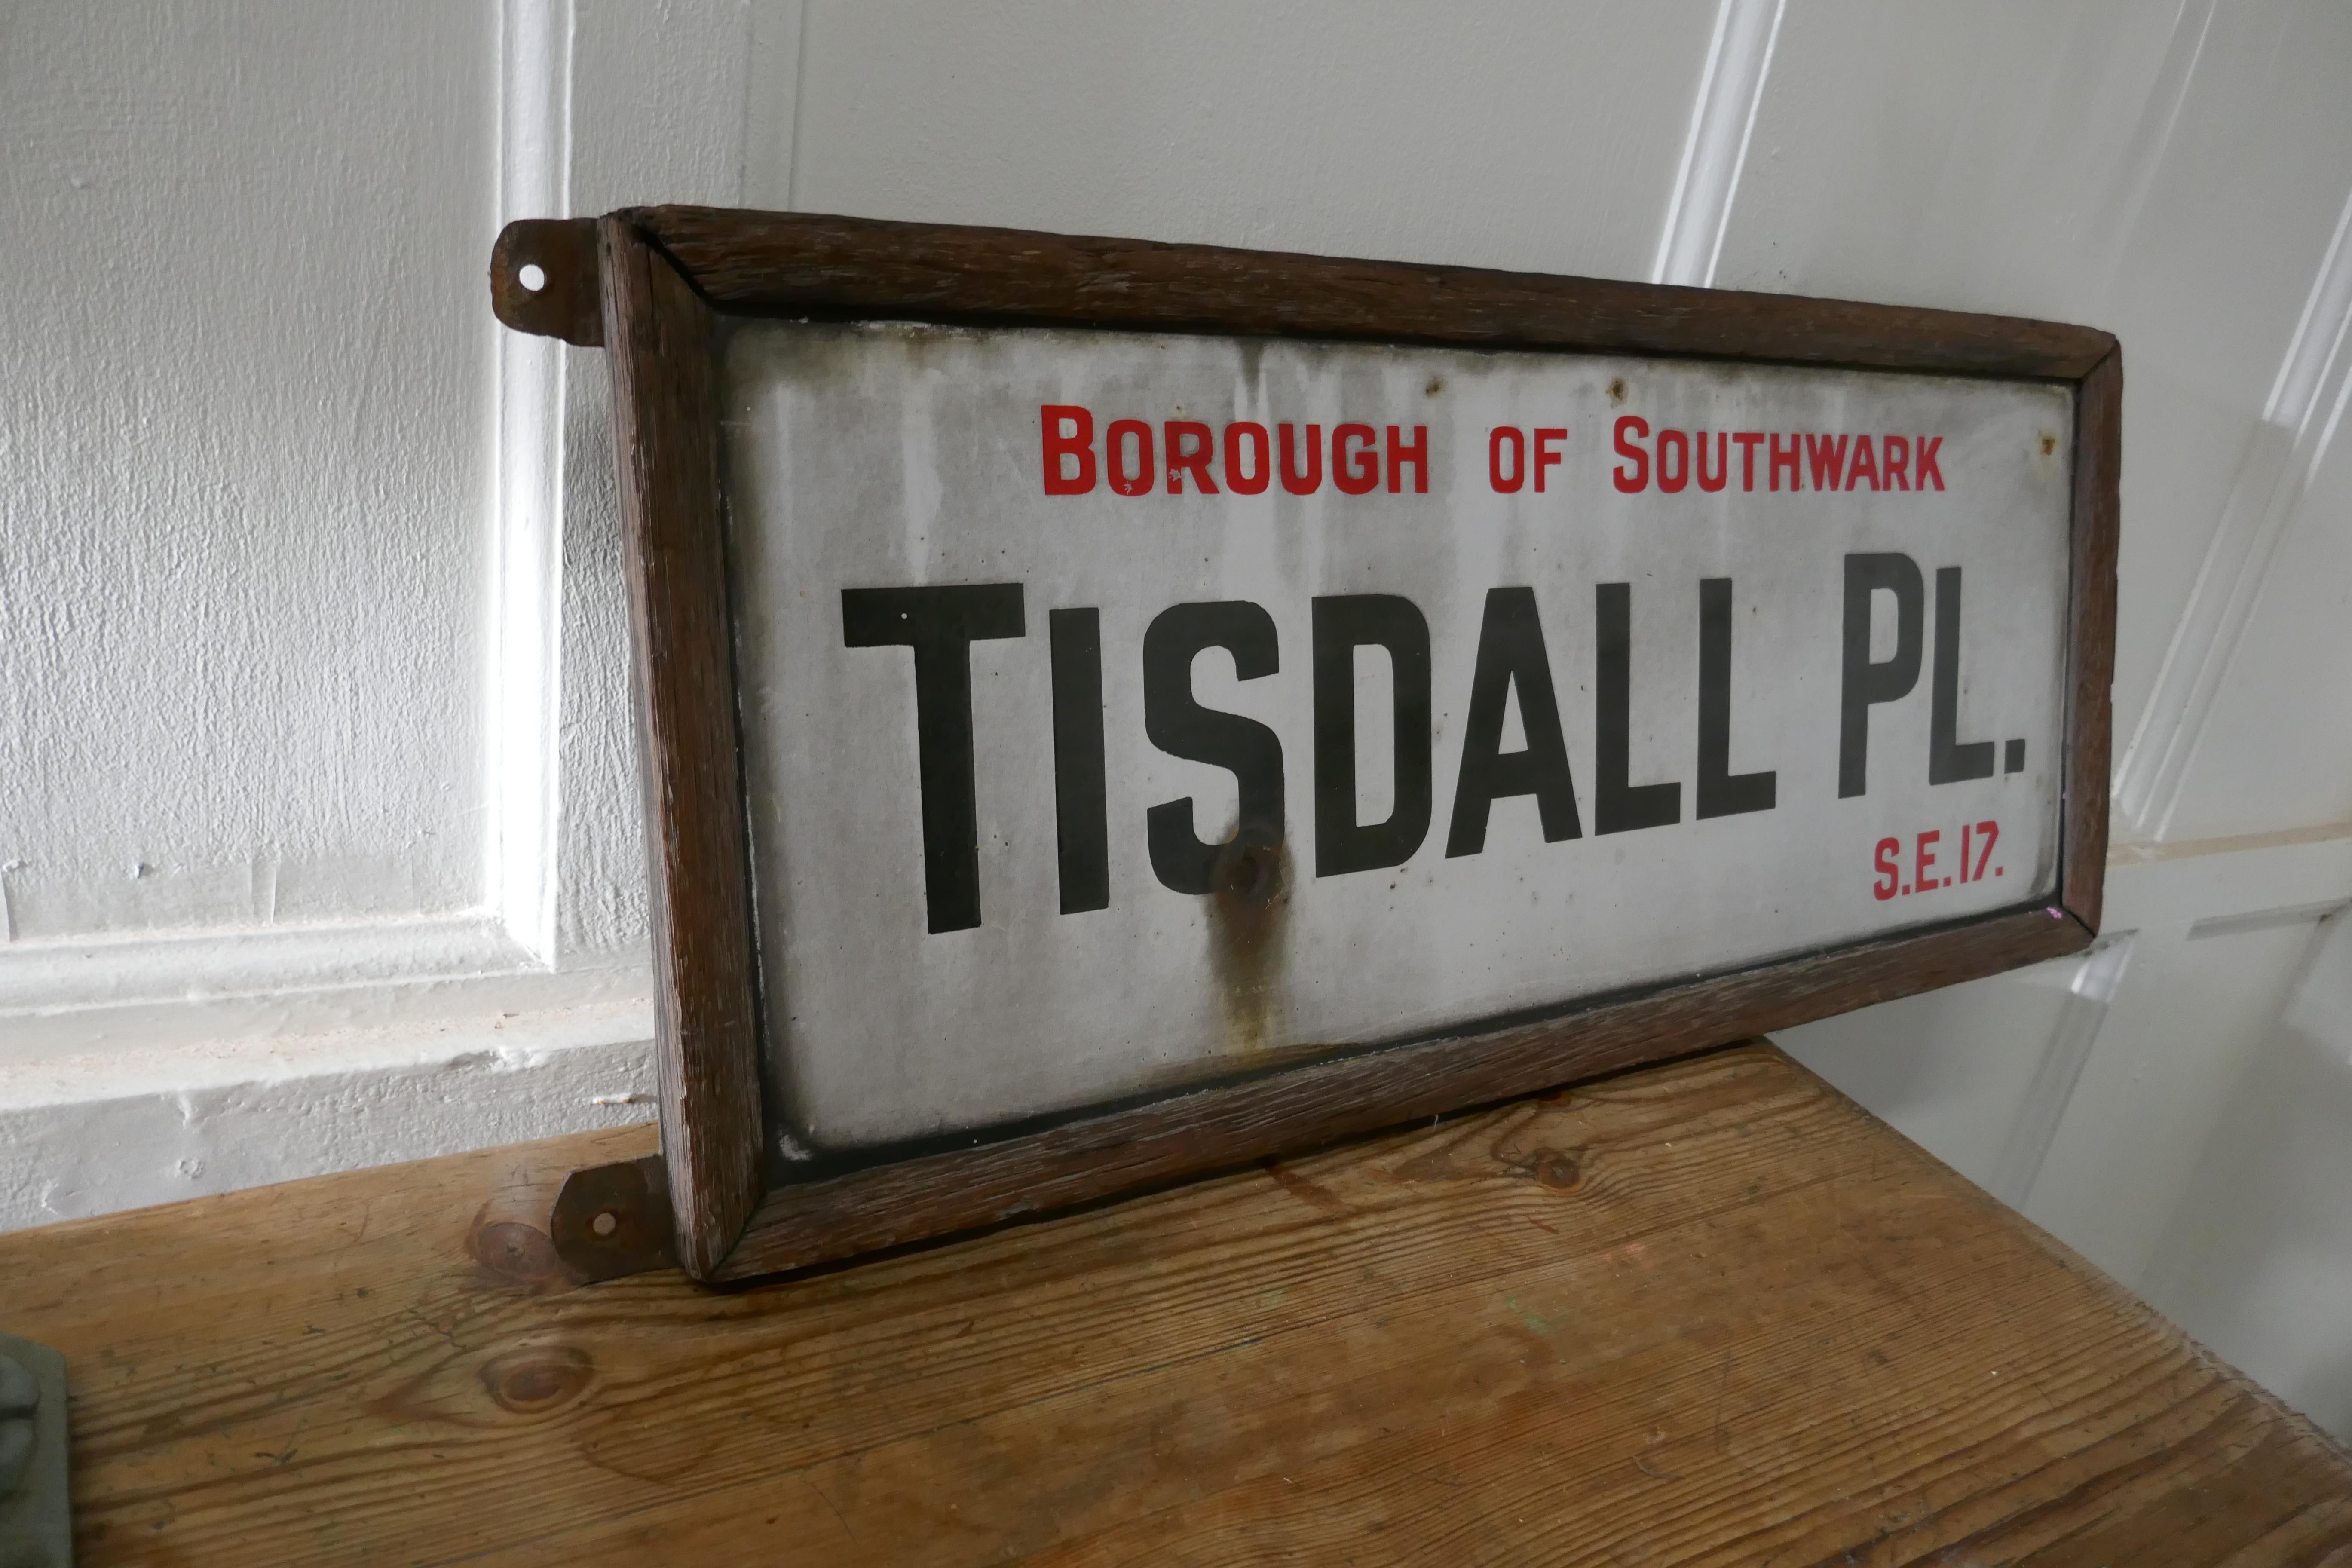 Framed enamel Southwark street sign, Tisdall Place, London

The sign is embossed enamel and is in a very weathered old oak frame with wall fixings
The sign has a little rust but is in generally good condition for its age and all is part of its